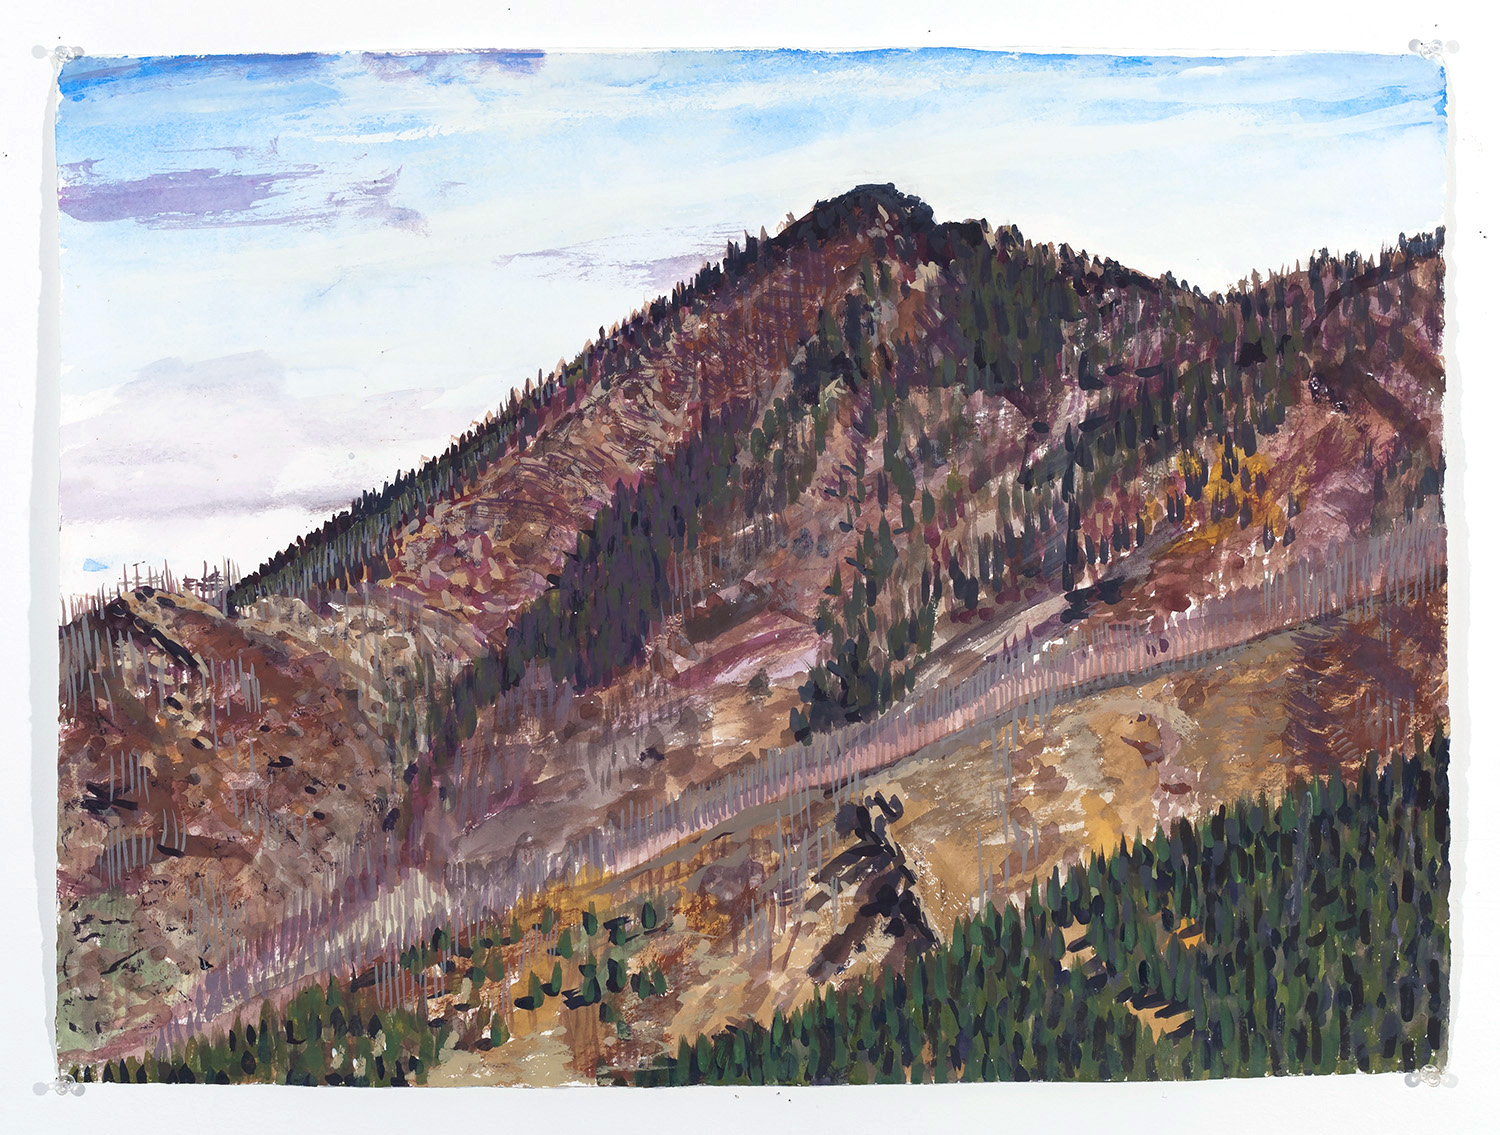  Bear Peak no. 5 (left half), 2017, watercolor and gouache on paper, 22 x 30 inches 